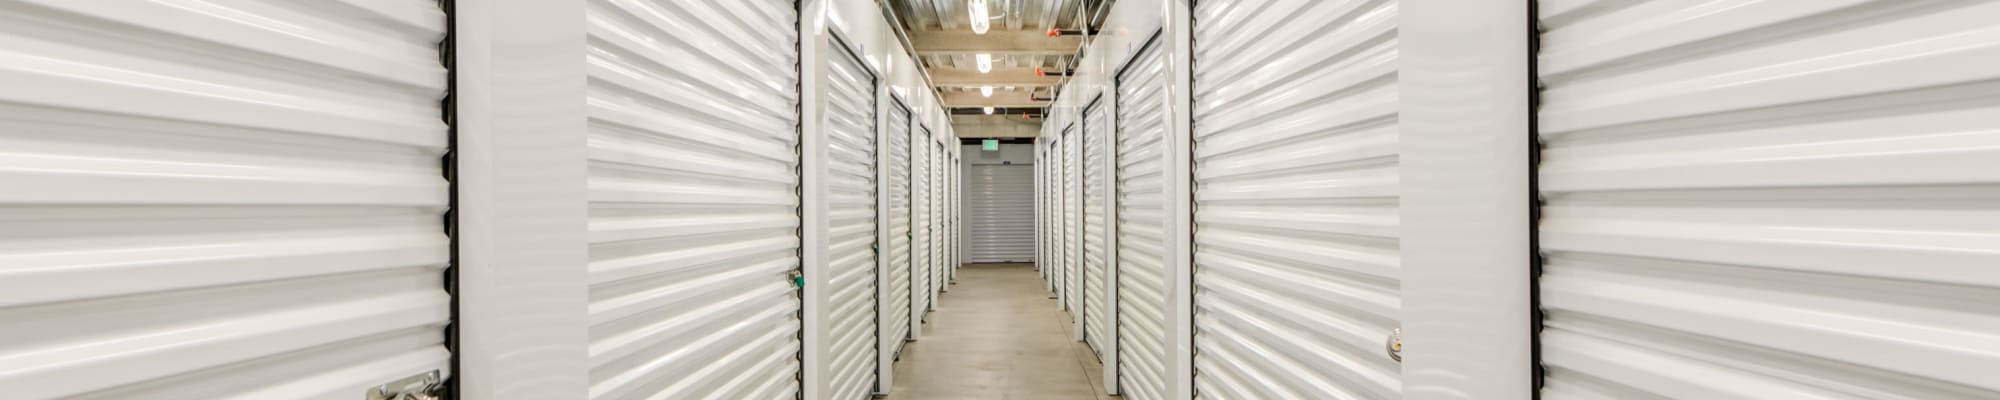 Contact us for your self storage needs in Chatsworth